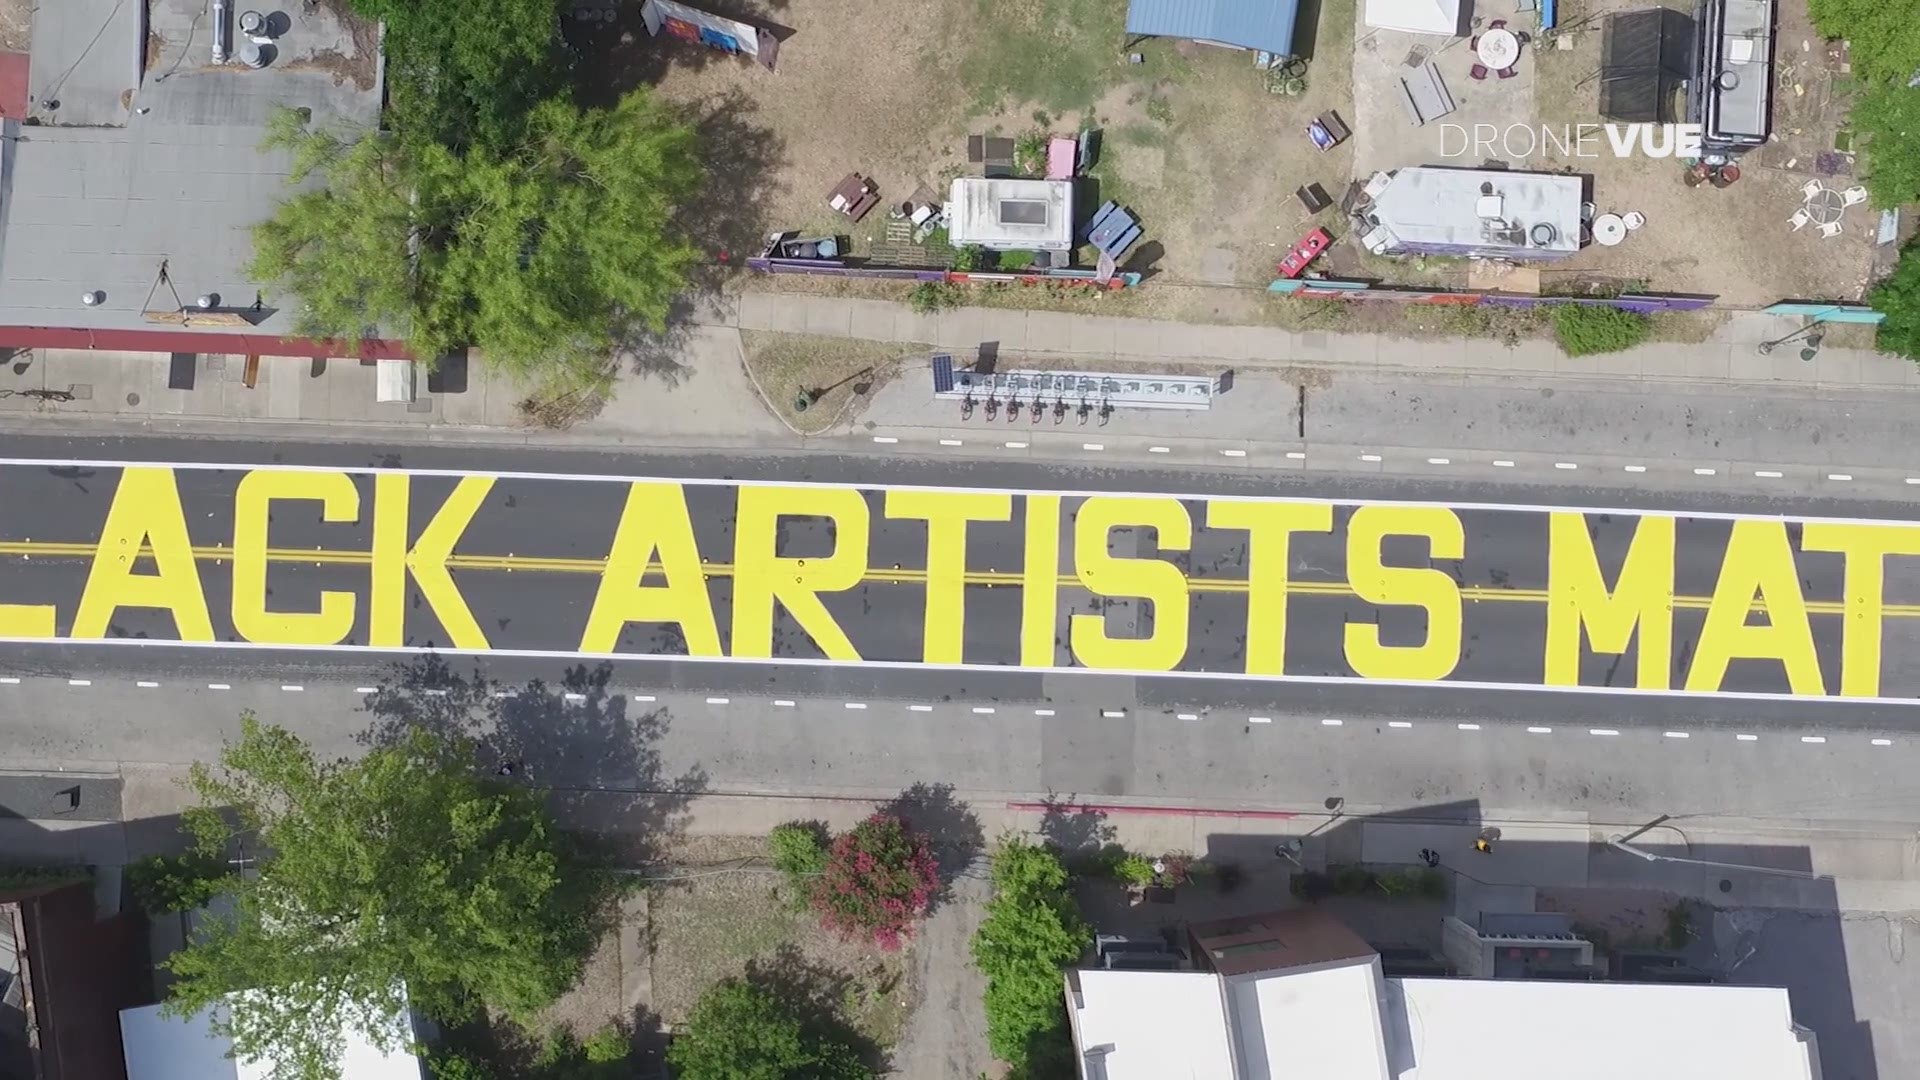 A new mural in East Austin celebrates the city's black population.